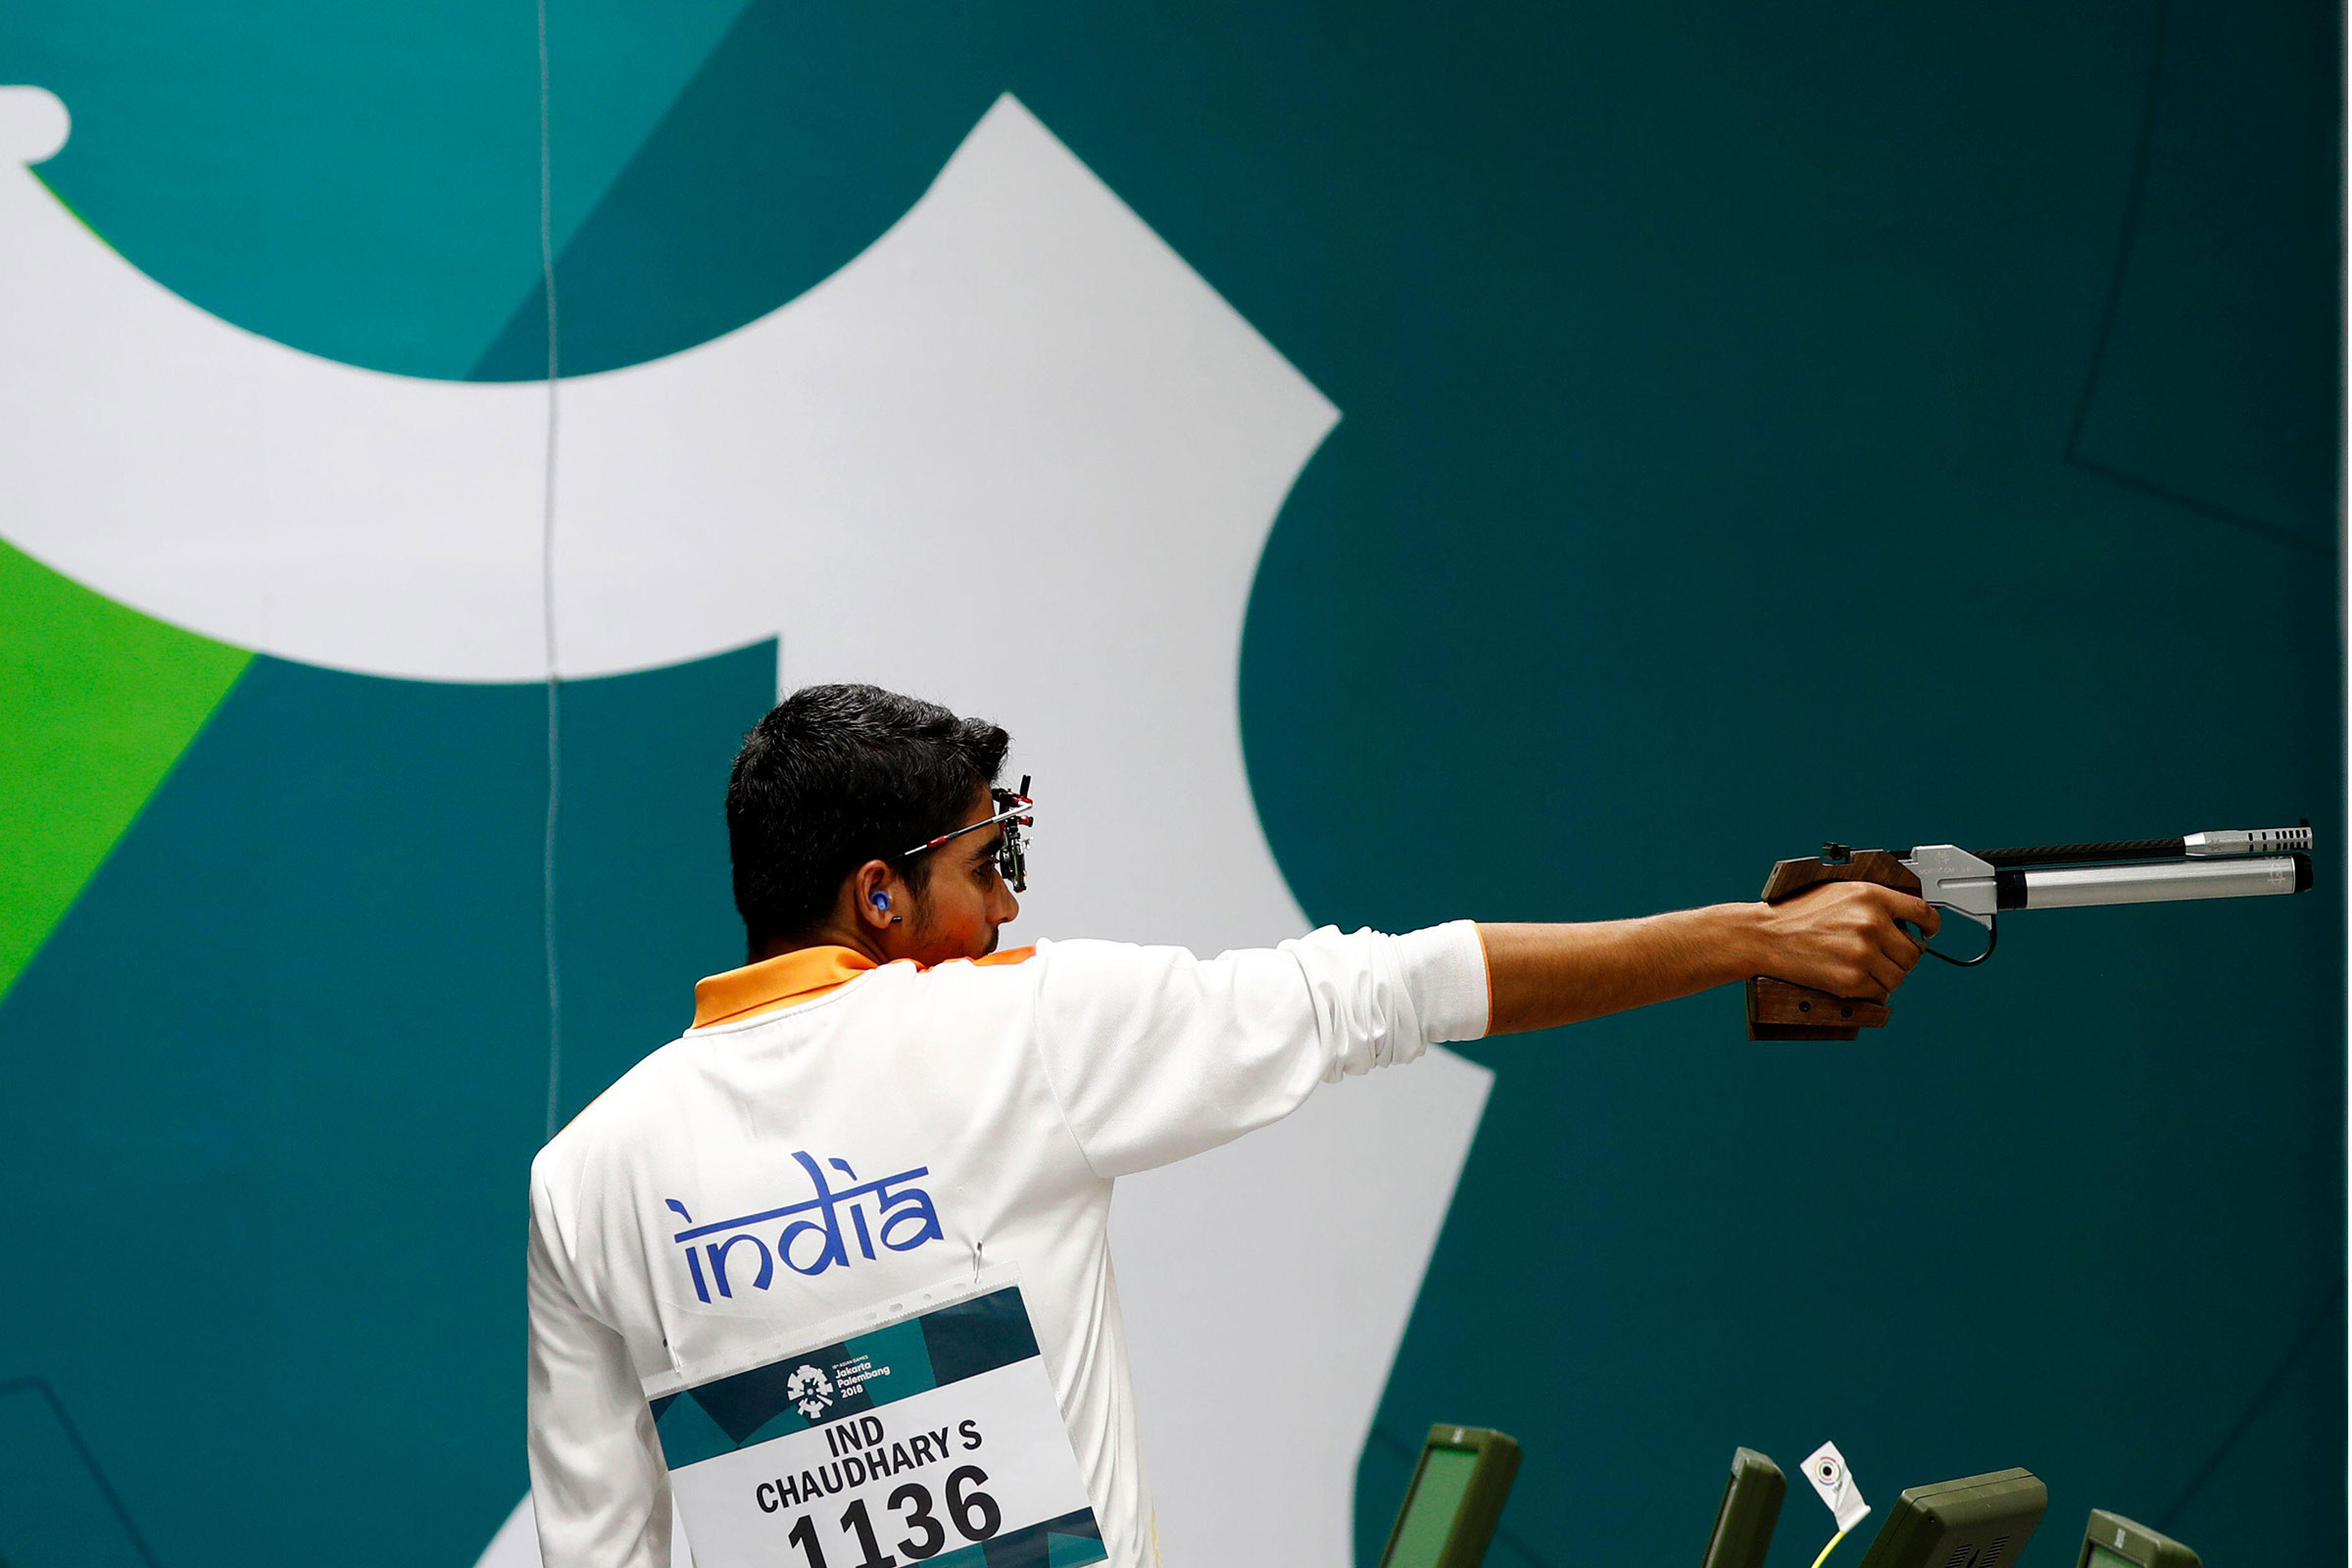 Saurabh Chaudhary of India competes in the Men's 10m Air Pistol Final at the 2018 Asian Games on August 21, 2018 in Palembang, Indonesia.